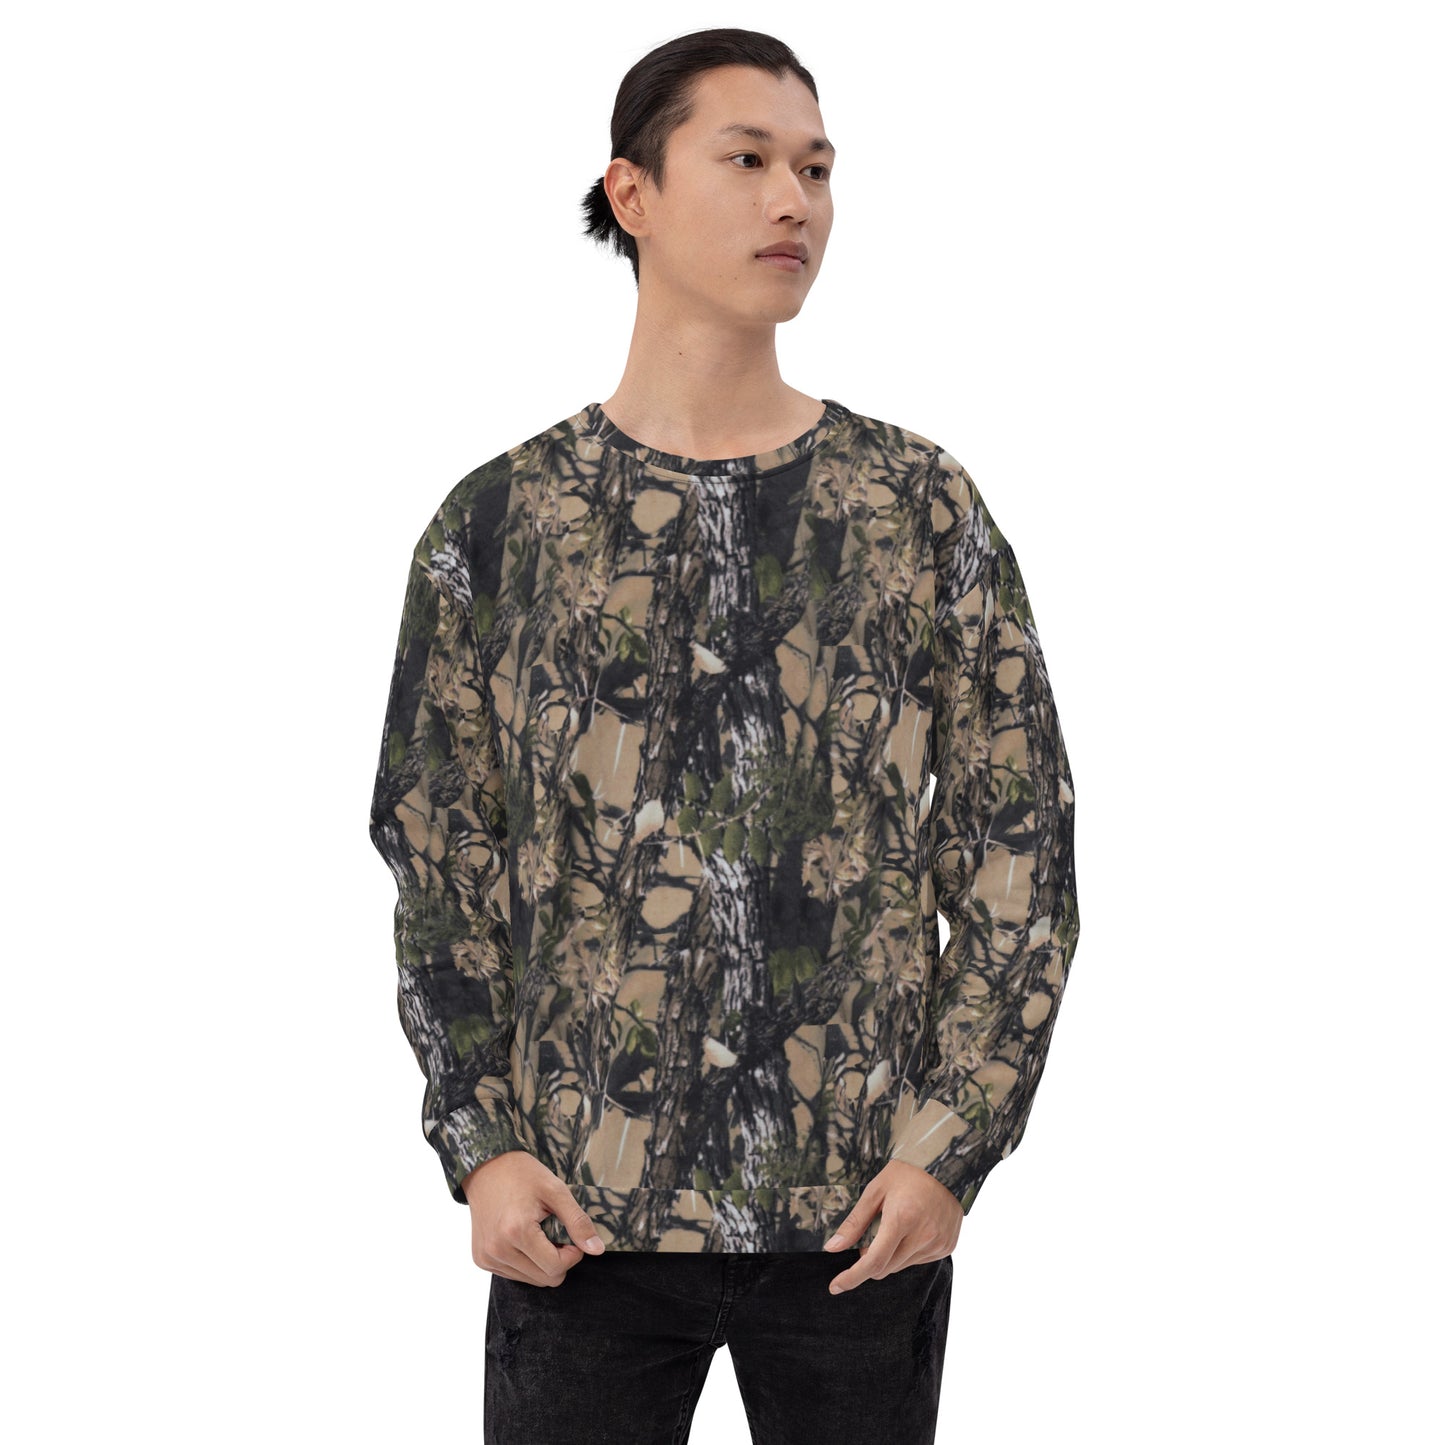 A picture of a man wearing a unisex all over print Camouflage Long sleeve sweatshirt - front side